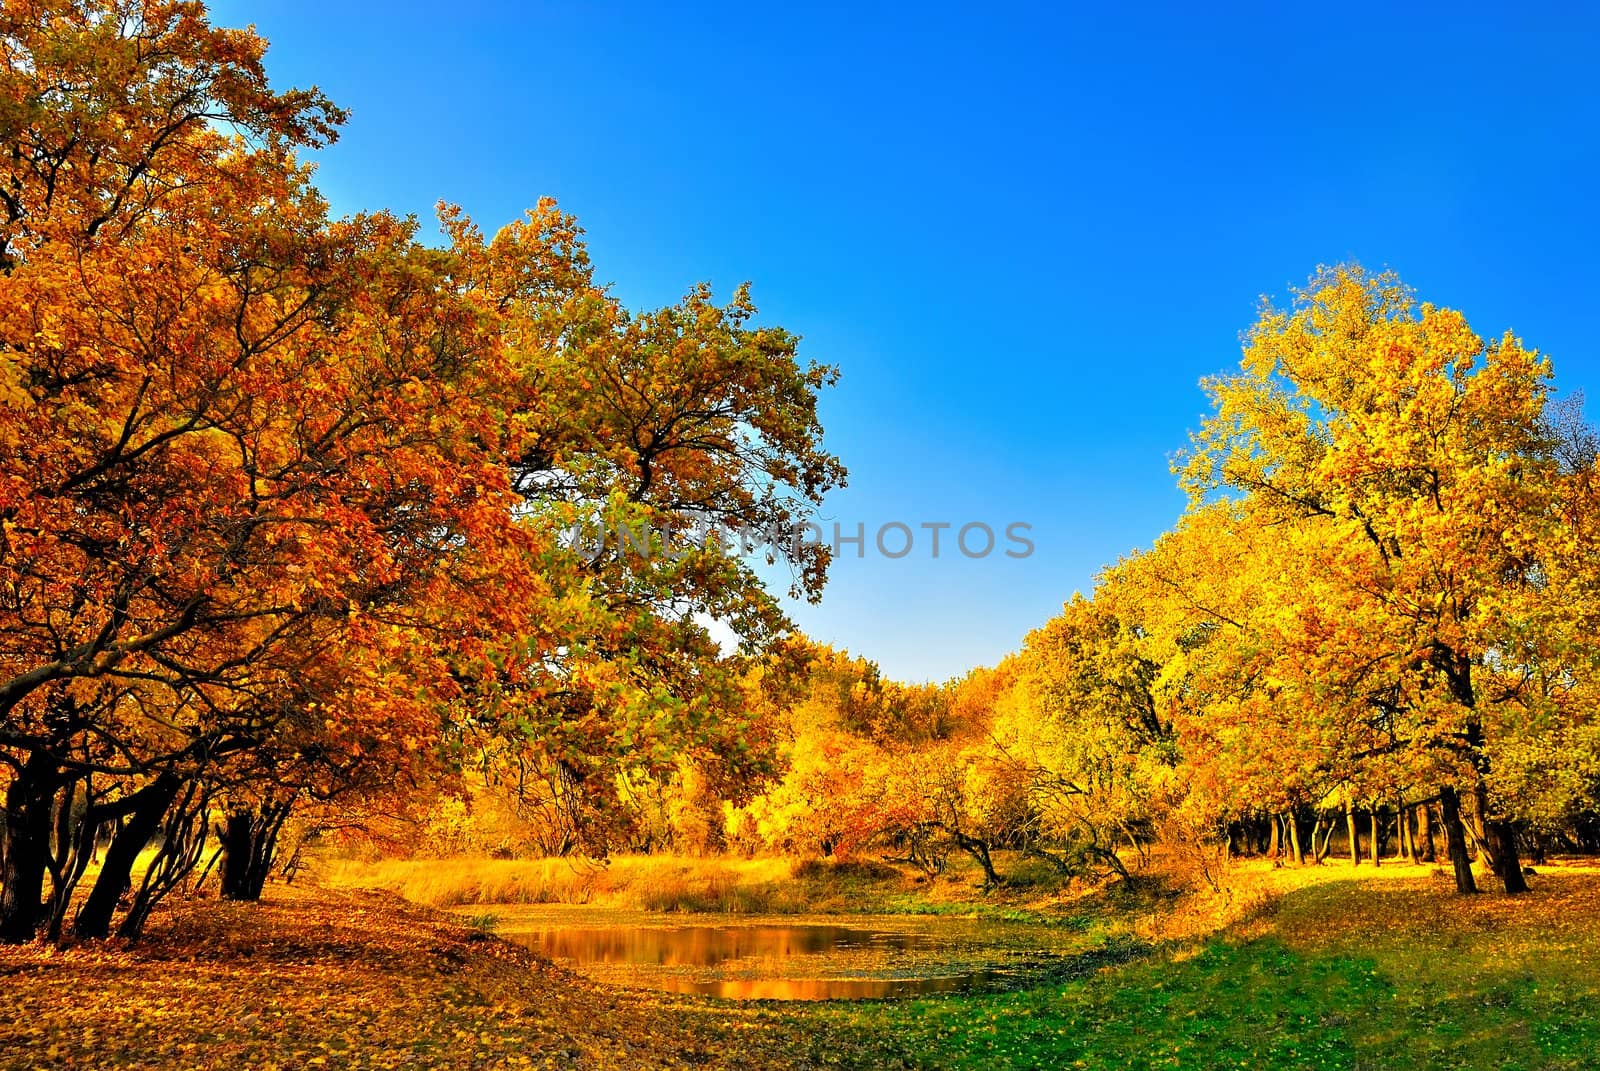 Autumn forest and a small lake in the background of blue sky